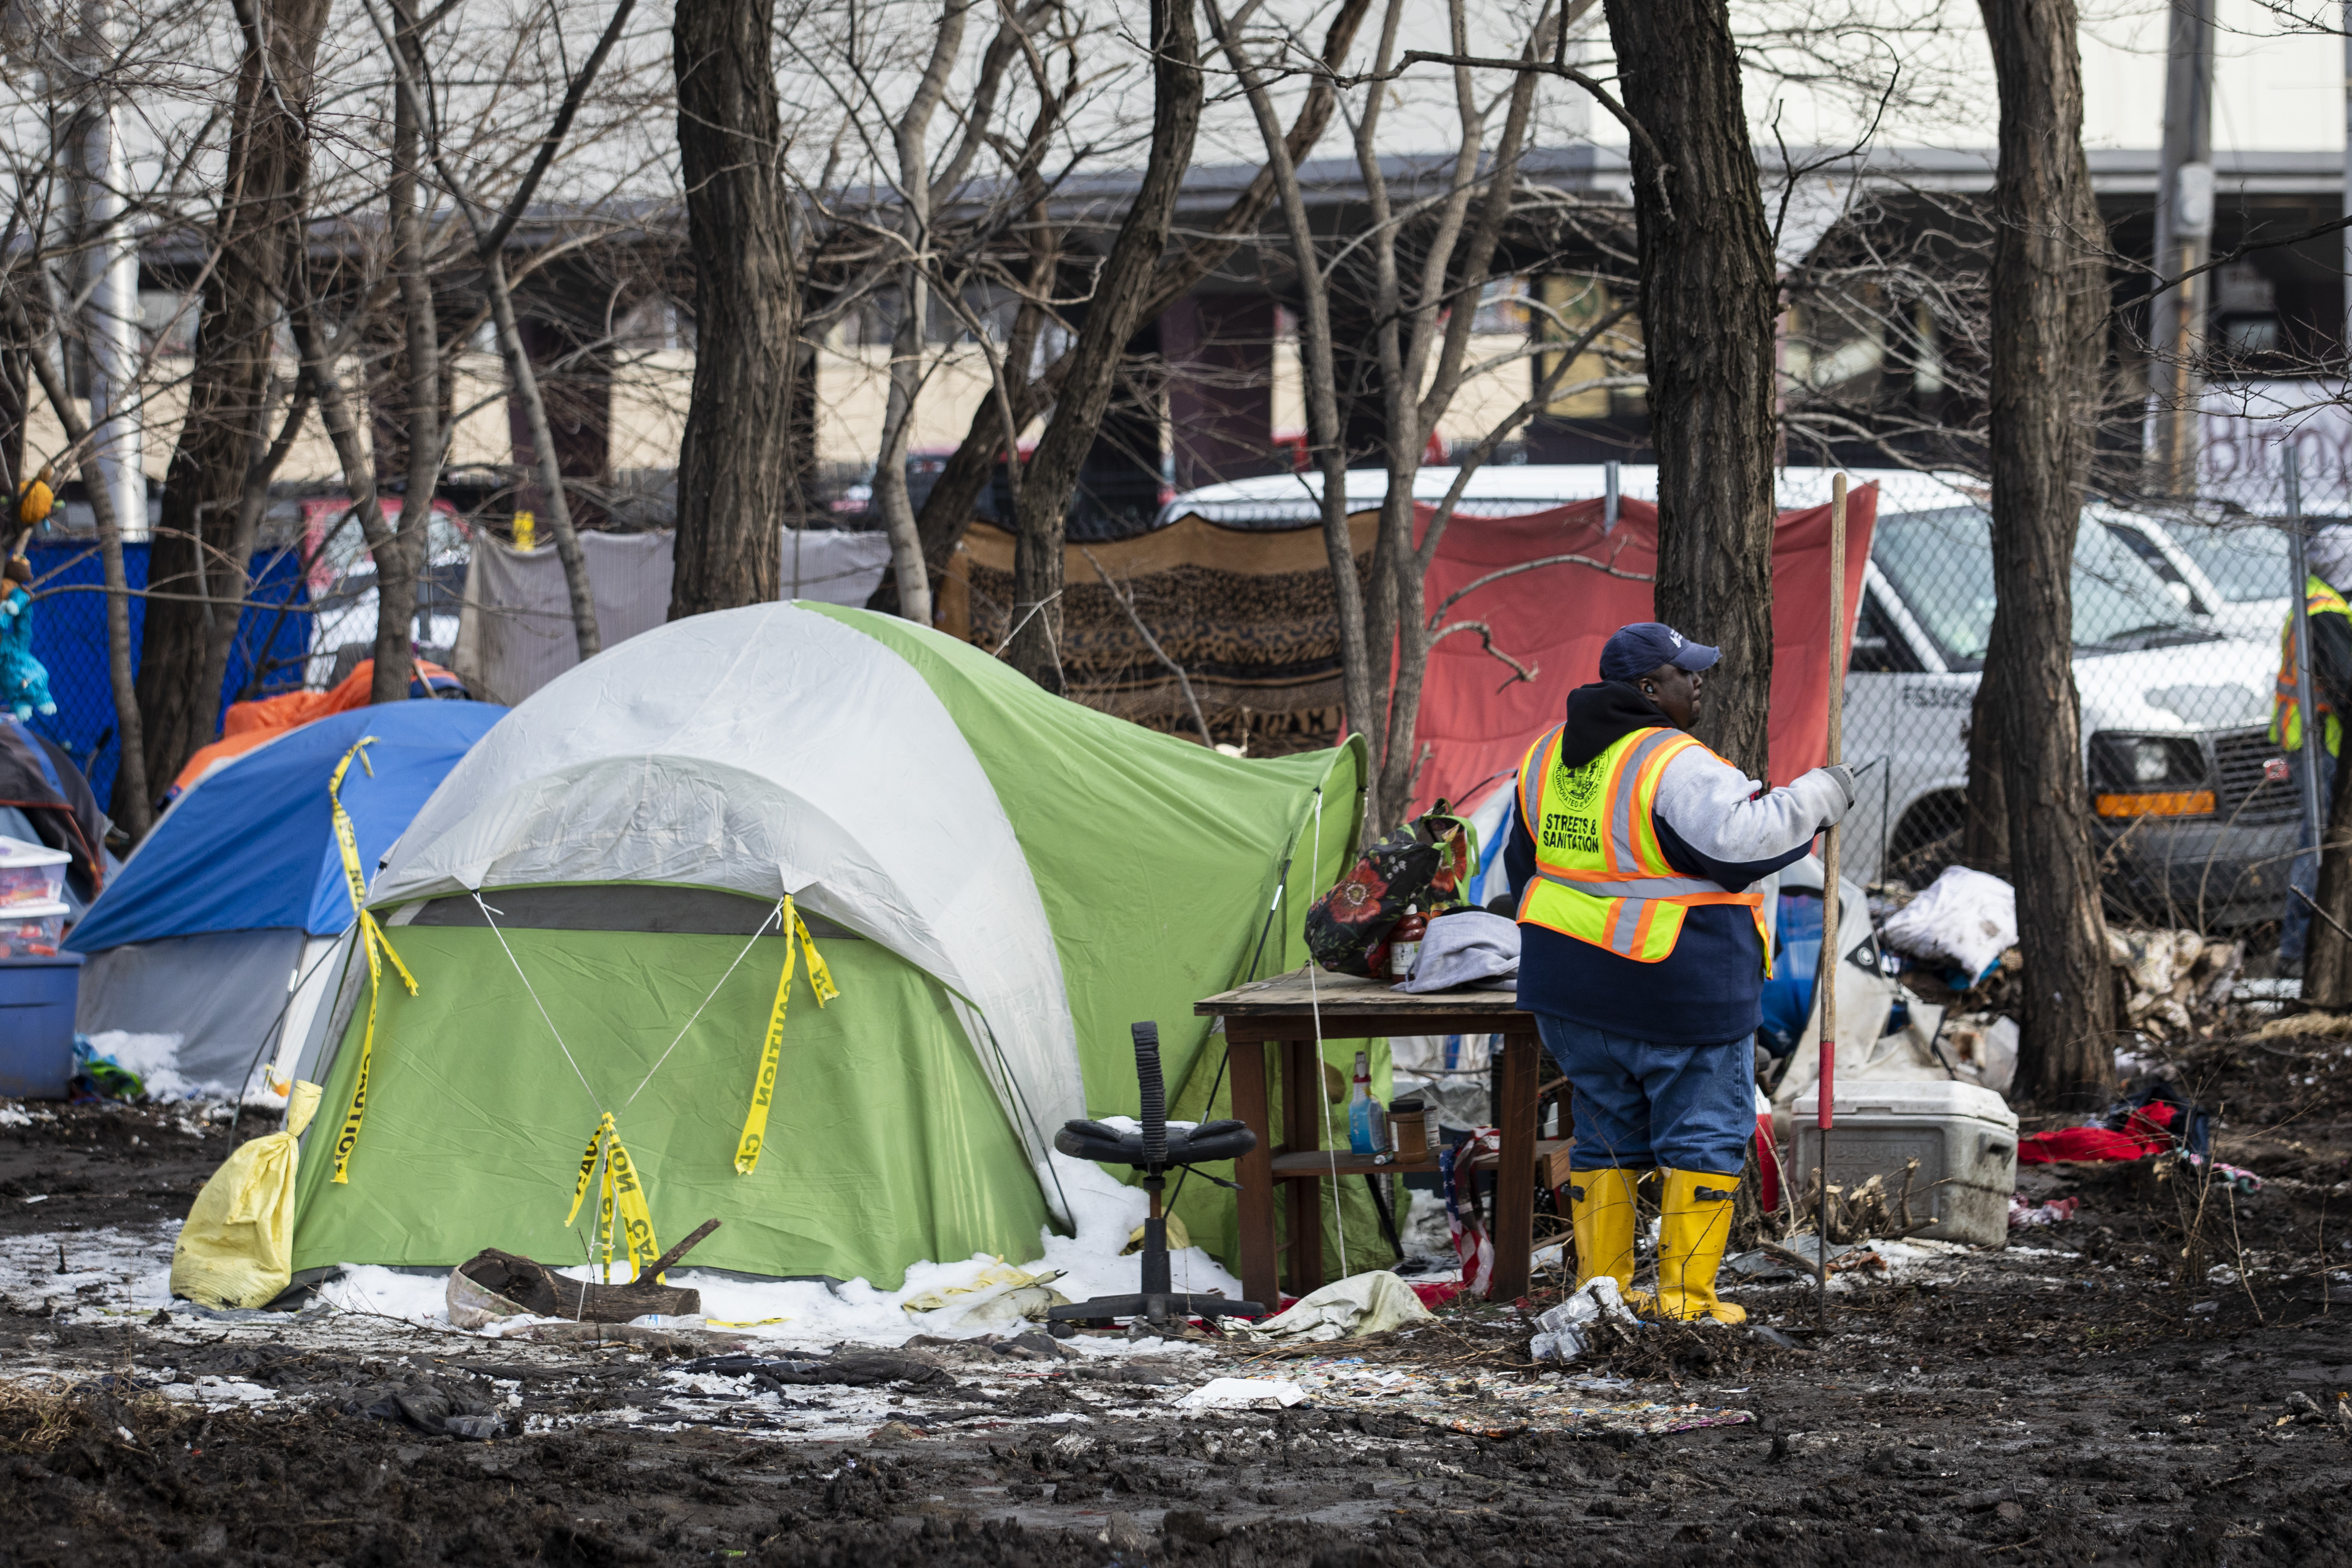 Workers from the city’s Department of Streets and Sanitation clear out a homeless encampment near South Desplaines Street and West Roosevelt Road.